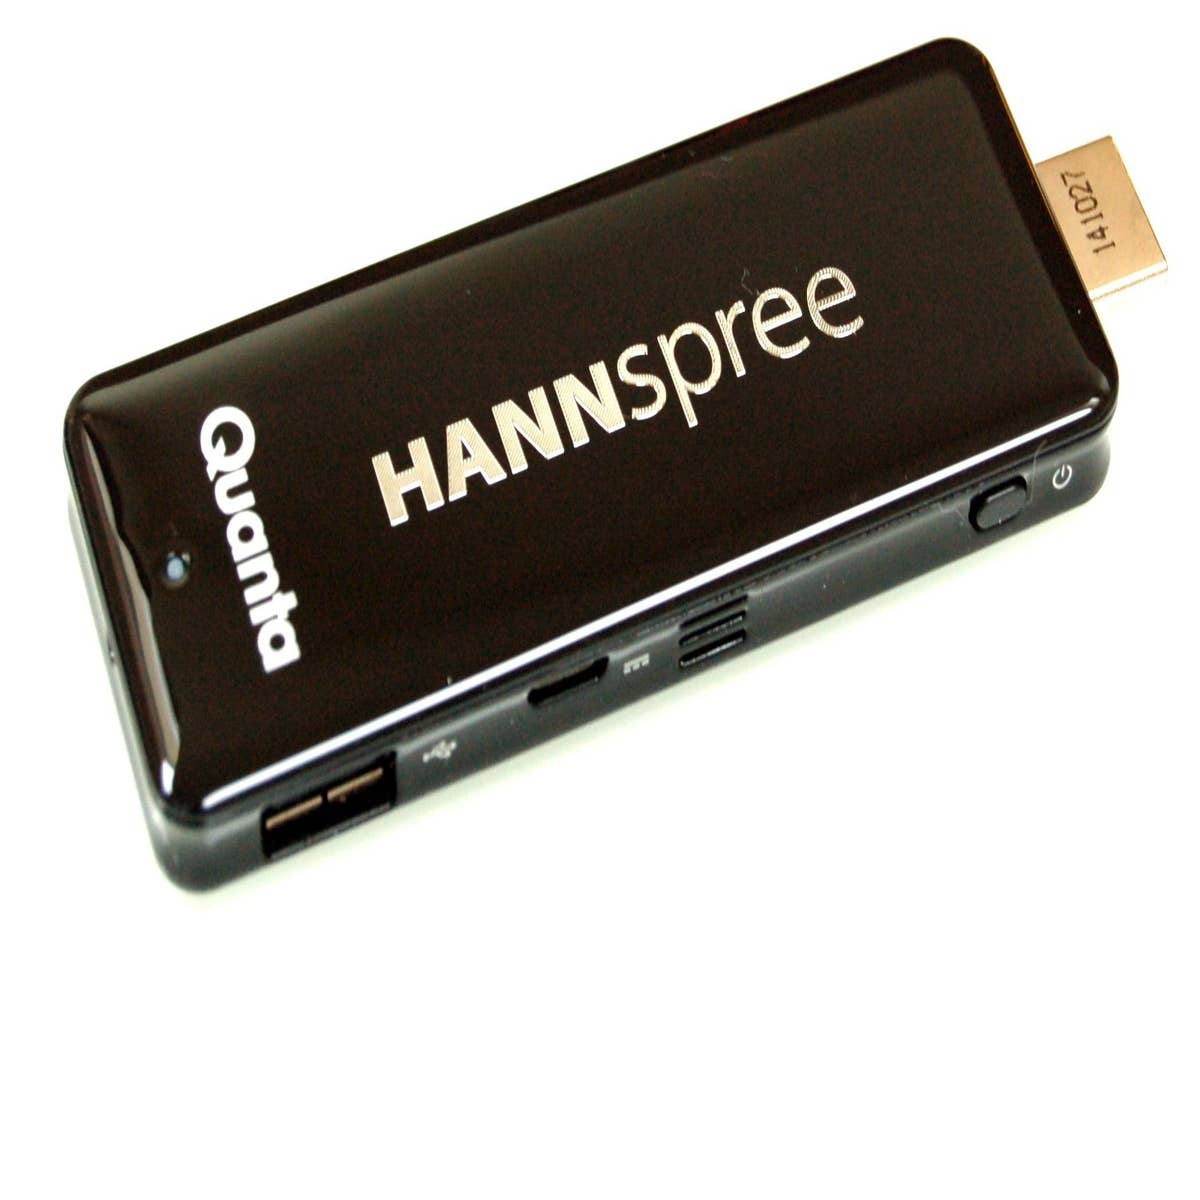 Windows on a stick: the Hannspree Micro PC review